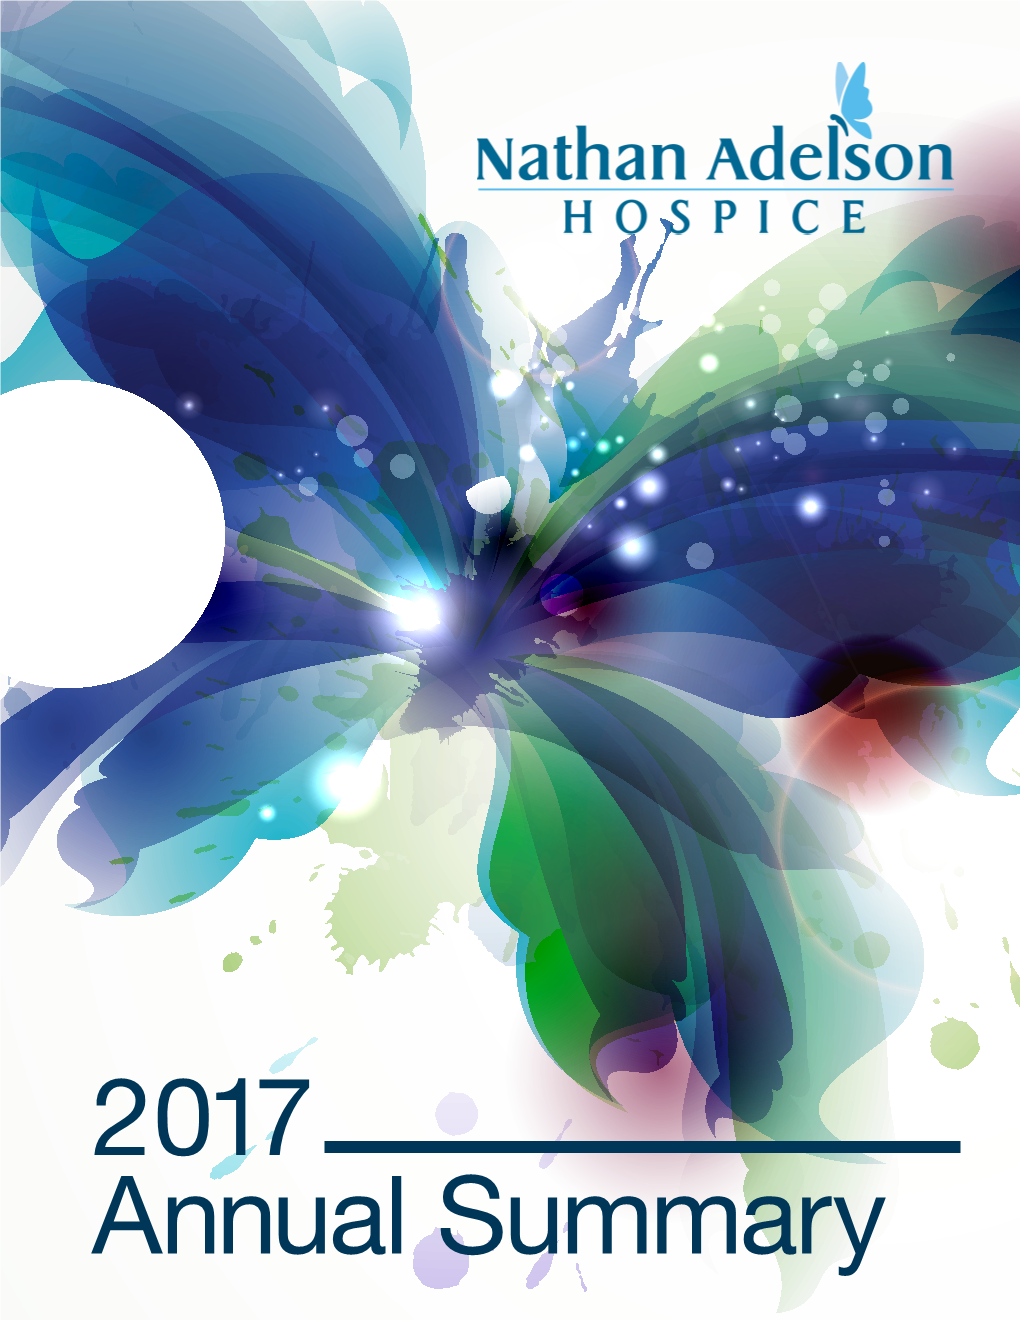 2017 Annual Summary Details the Accomplishments of Our Organization